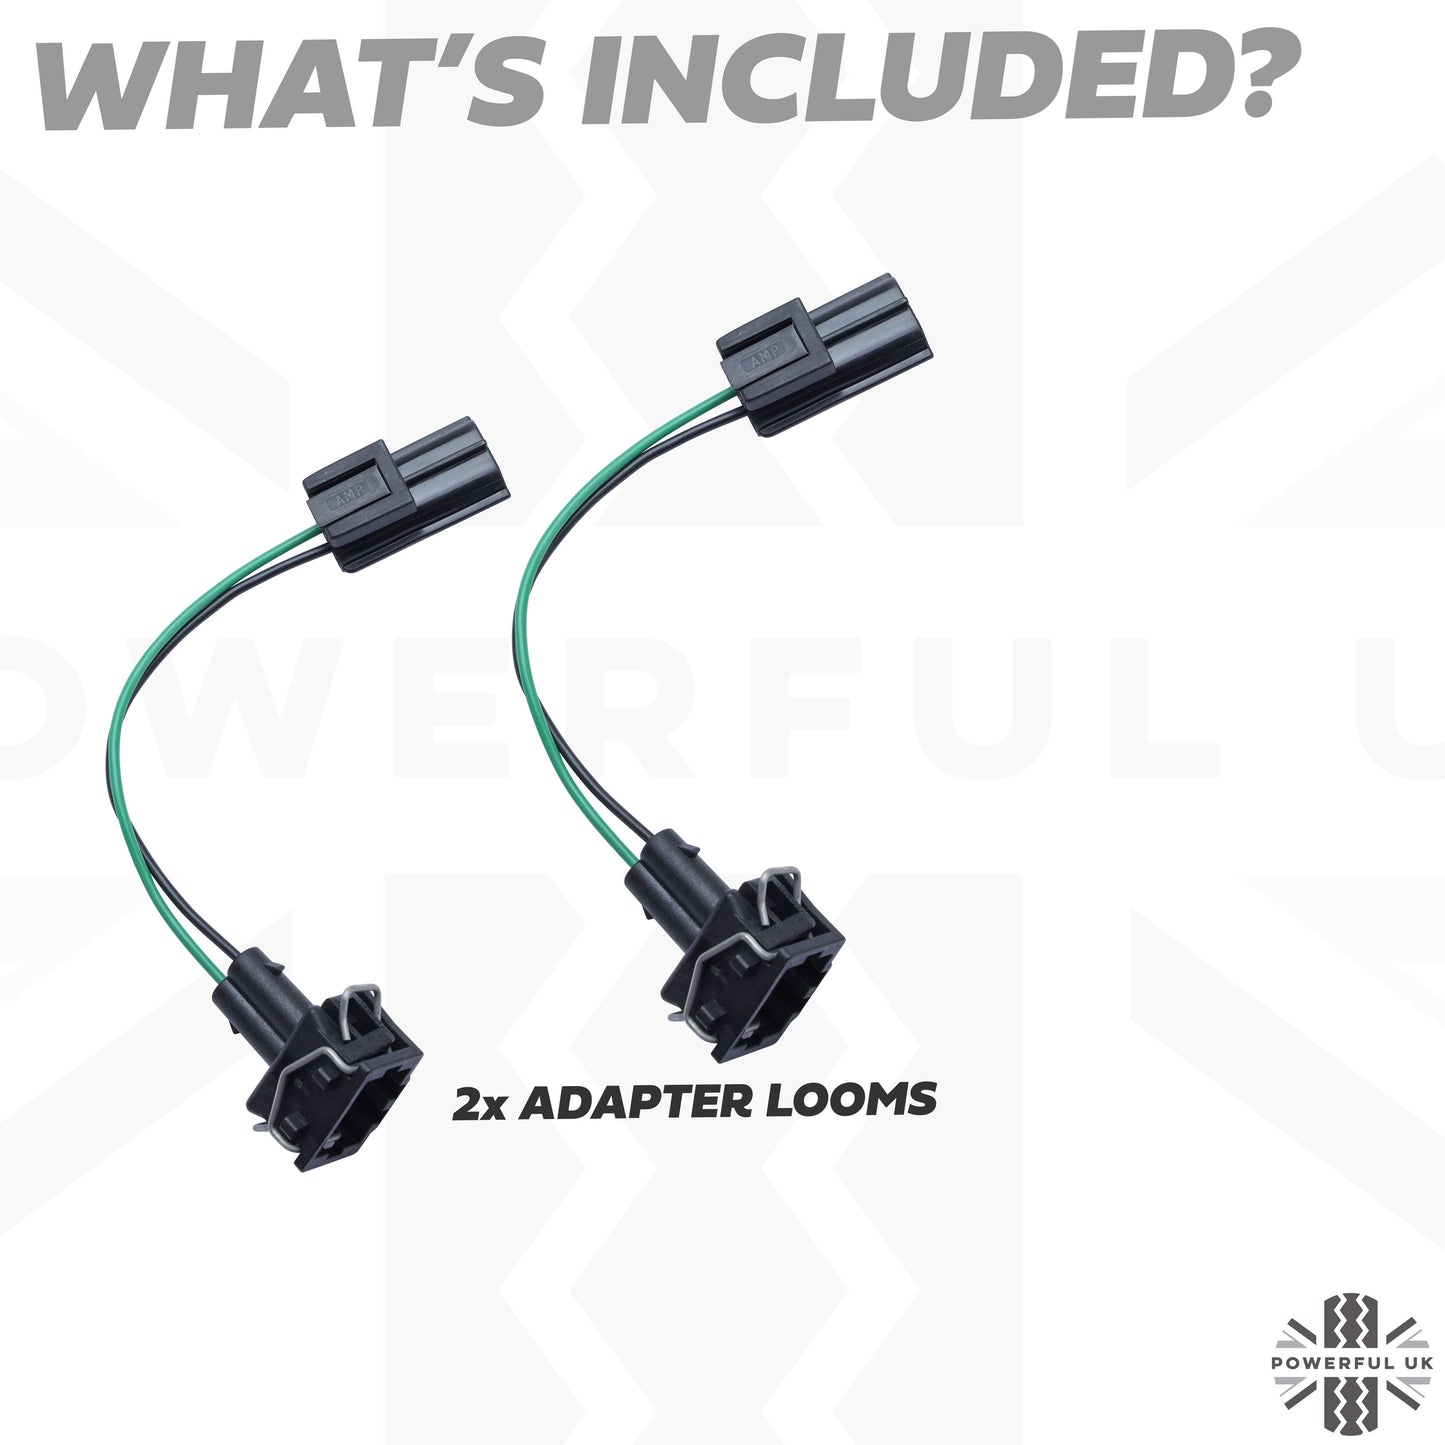 2x Wipac Stdanrd to NAS Light Adapter Looms for Land Rover Classic Defender